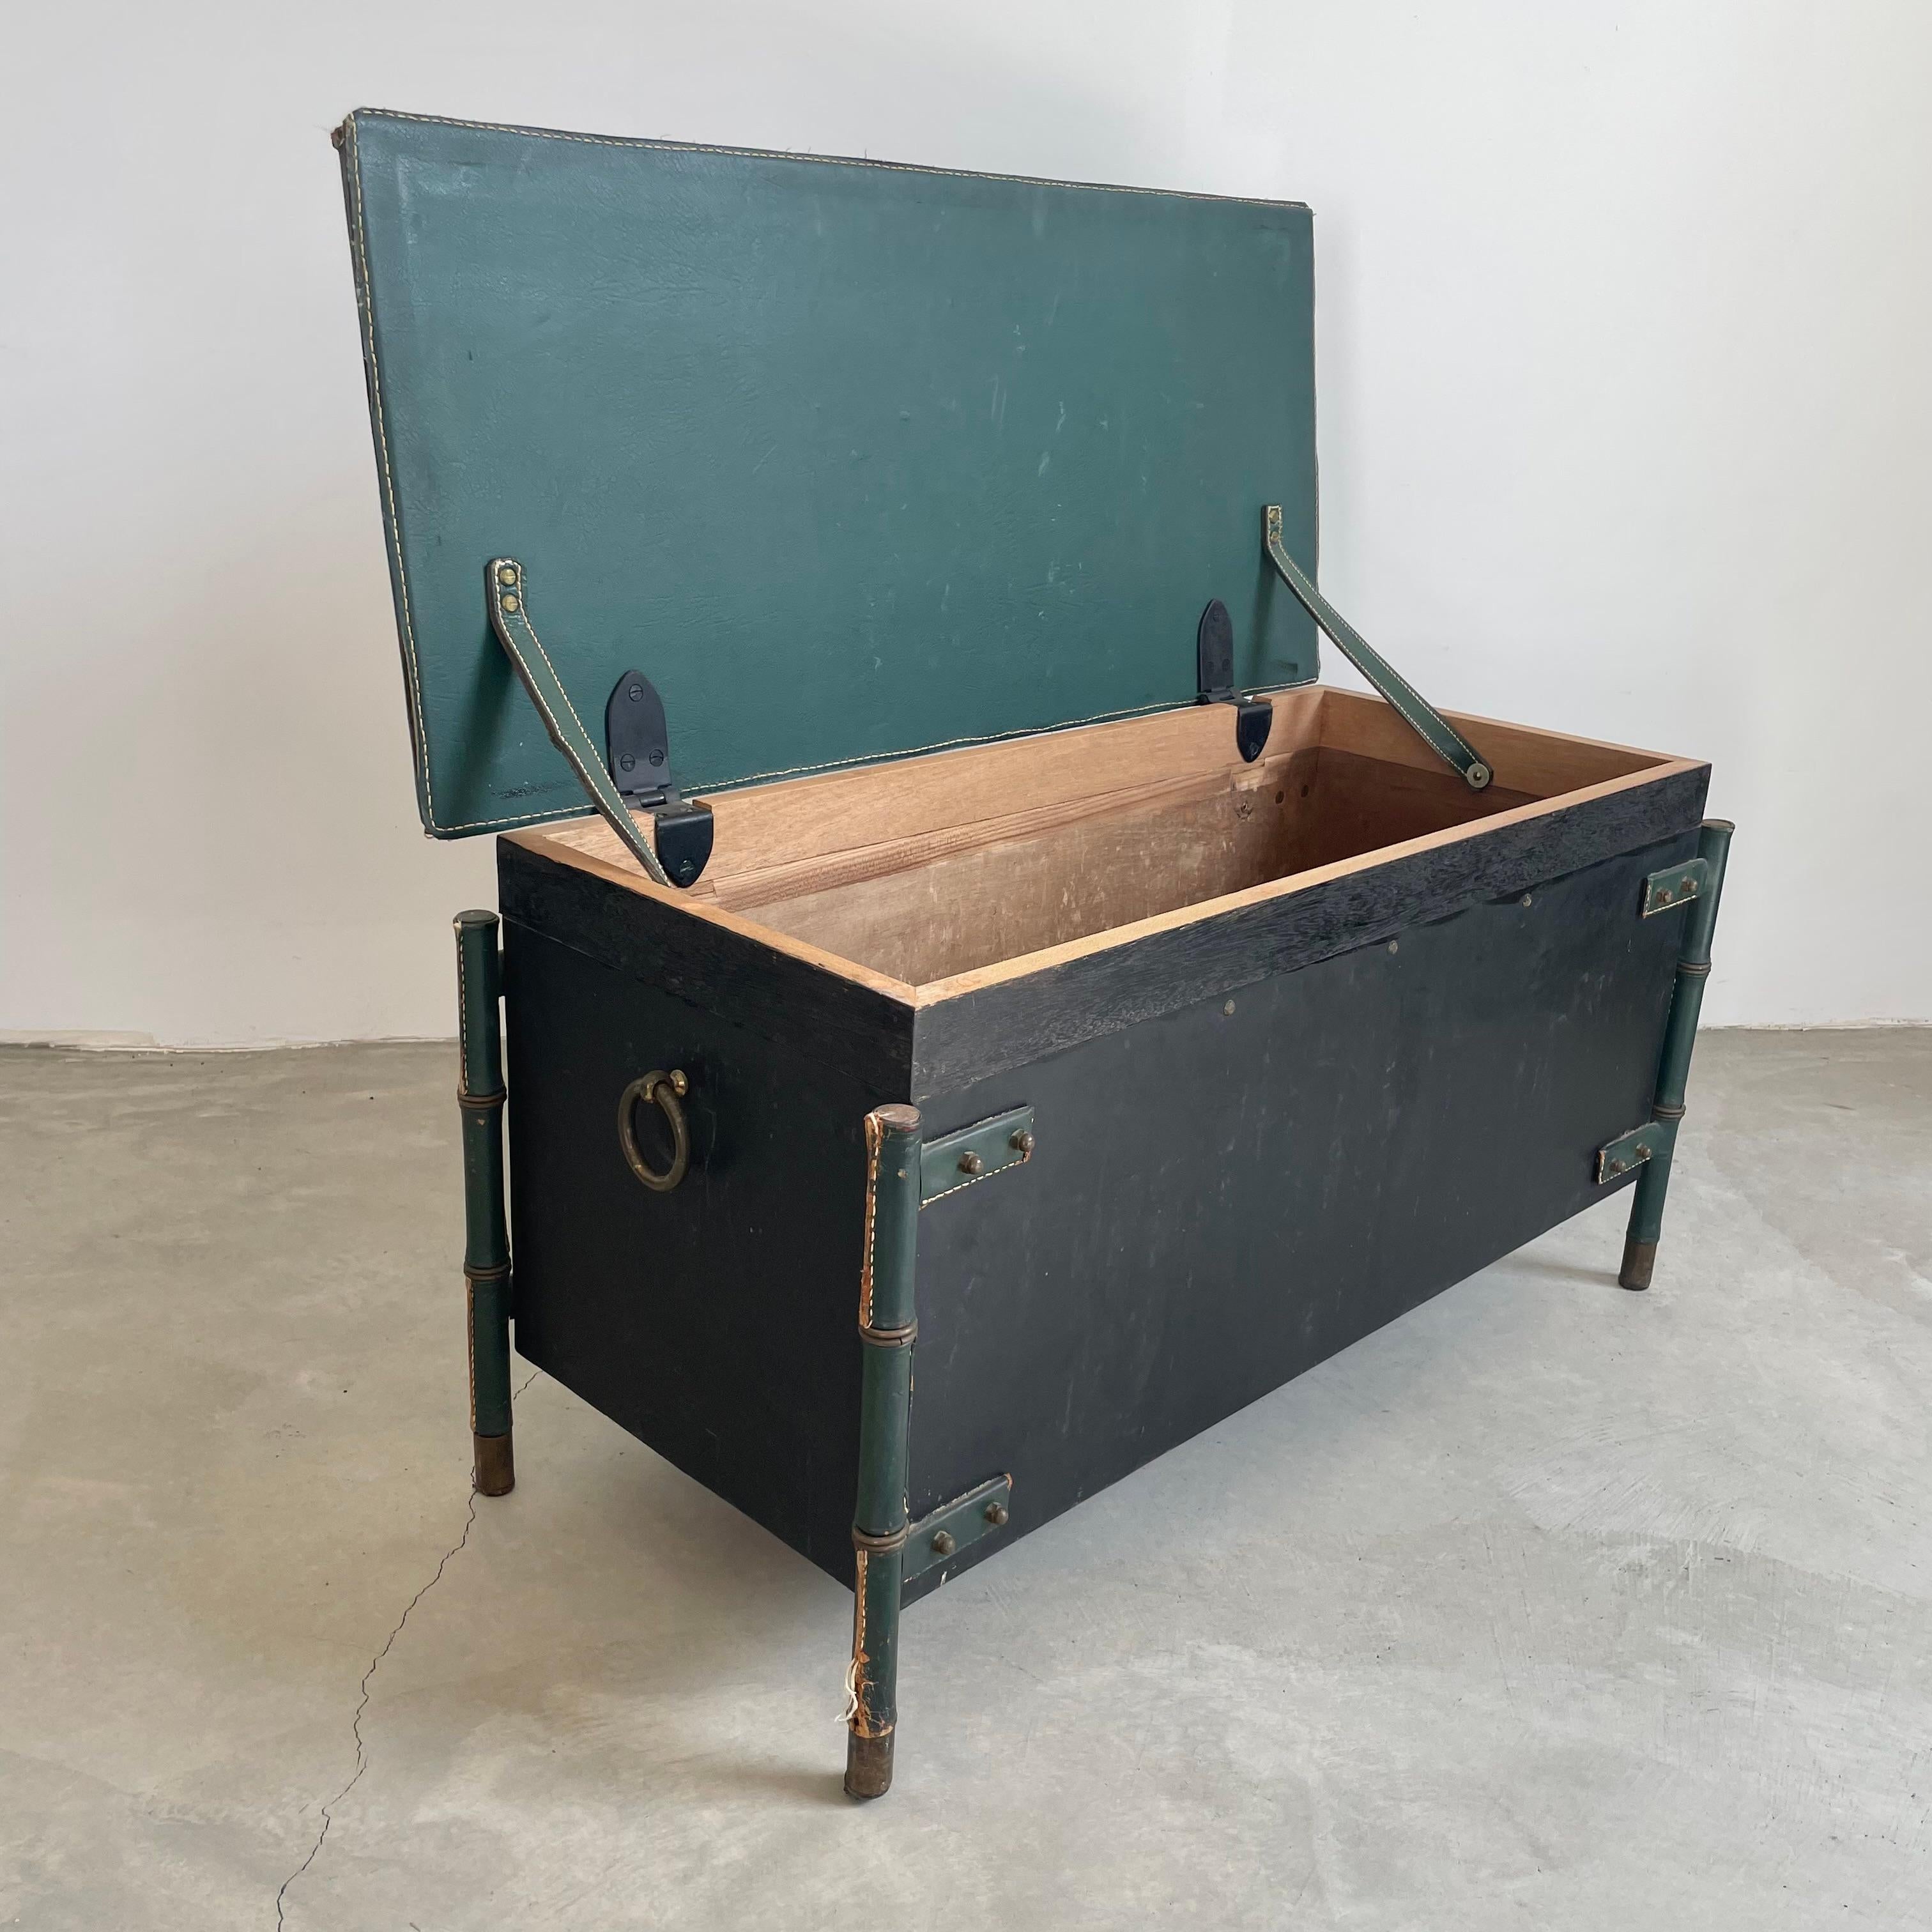 Stunning and rare Jacques Adnet storage bench in green leather and solid oak. Heavy and well built, strong enough to hold multiple people sitting on it and very roomy inside to place items in. Perfectly proportioned French modernist design. Brass